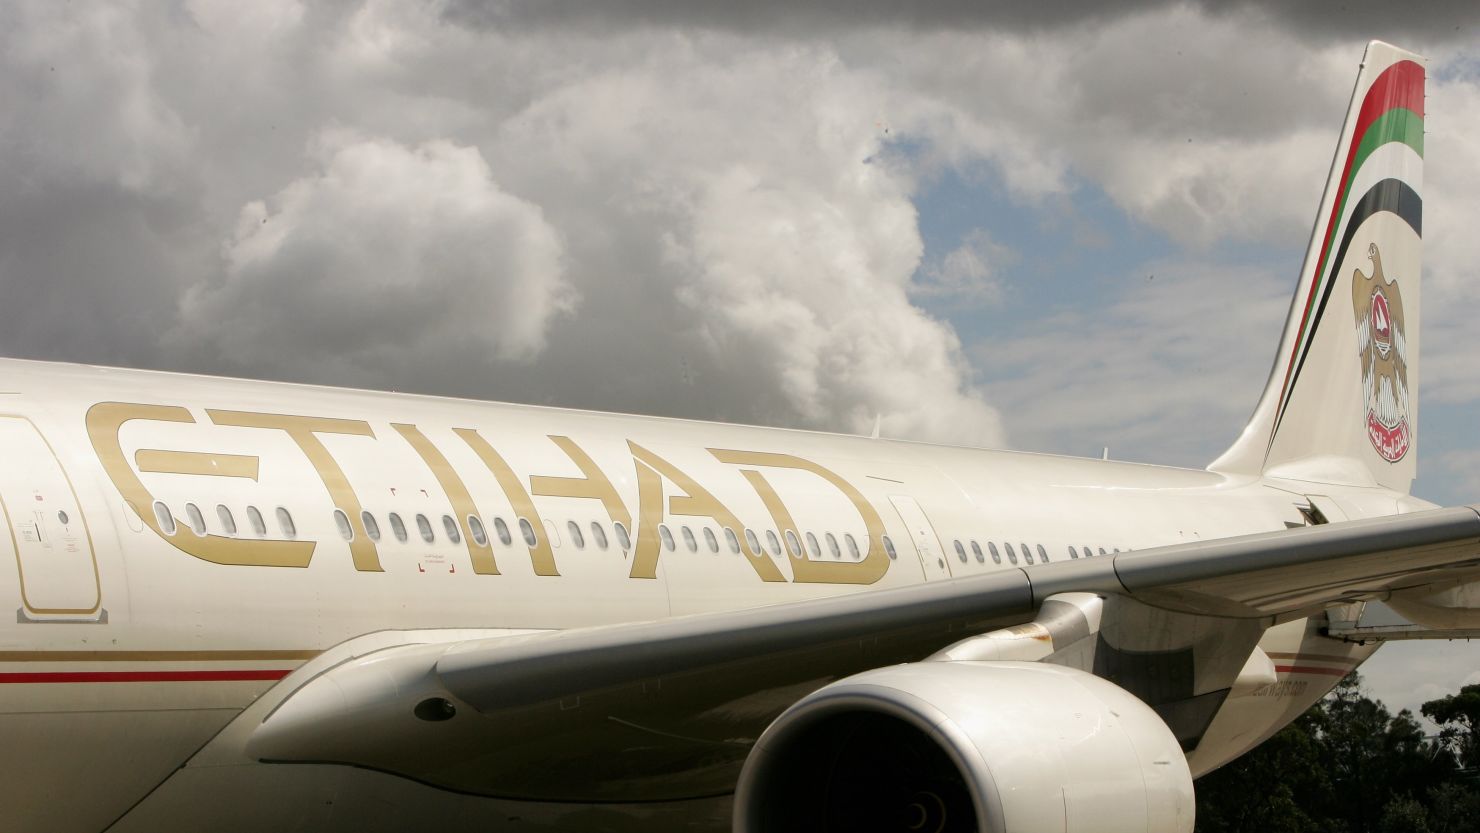 Etihad Airways made an emergency landing after fires on board a flight from Melbourne to Abu Dhabi on Monday. 